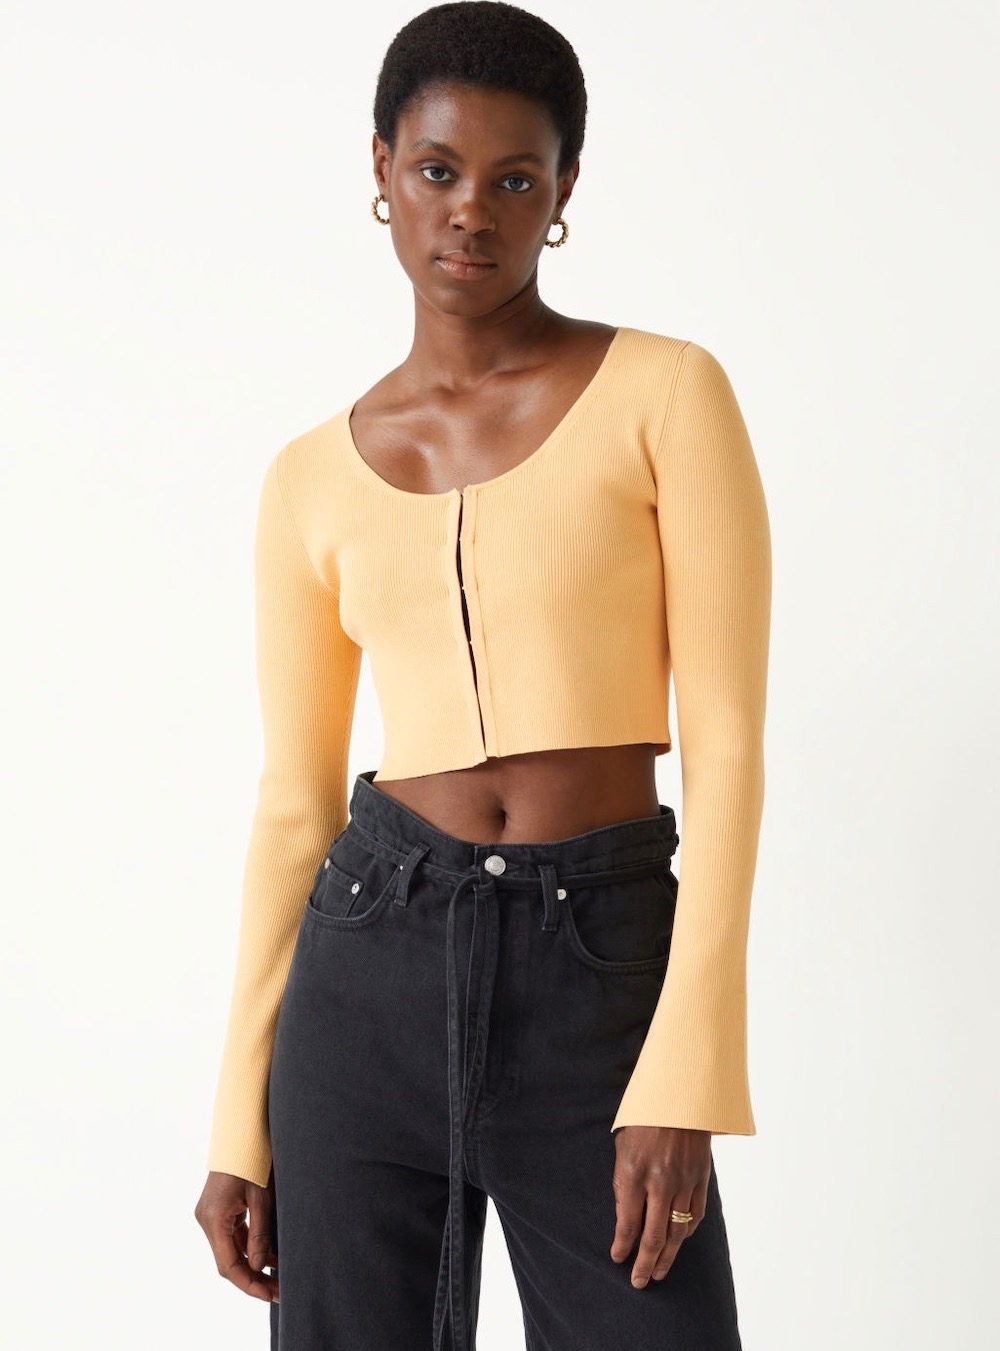 Cropped Cardigans to Up the Ante on Any Outfit - theFashionSpot